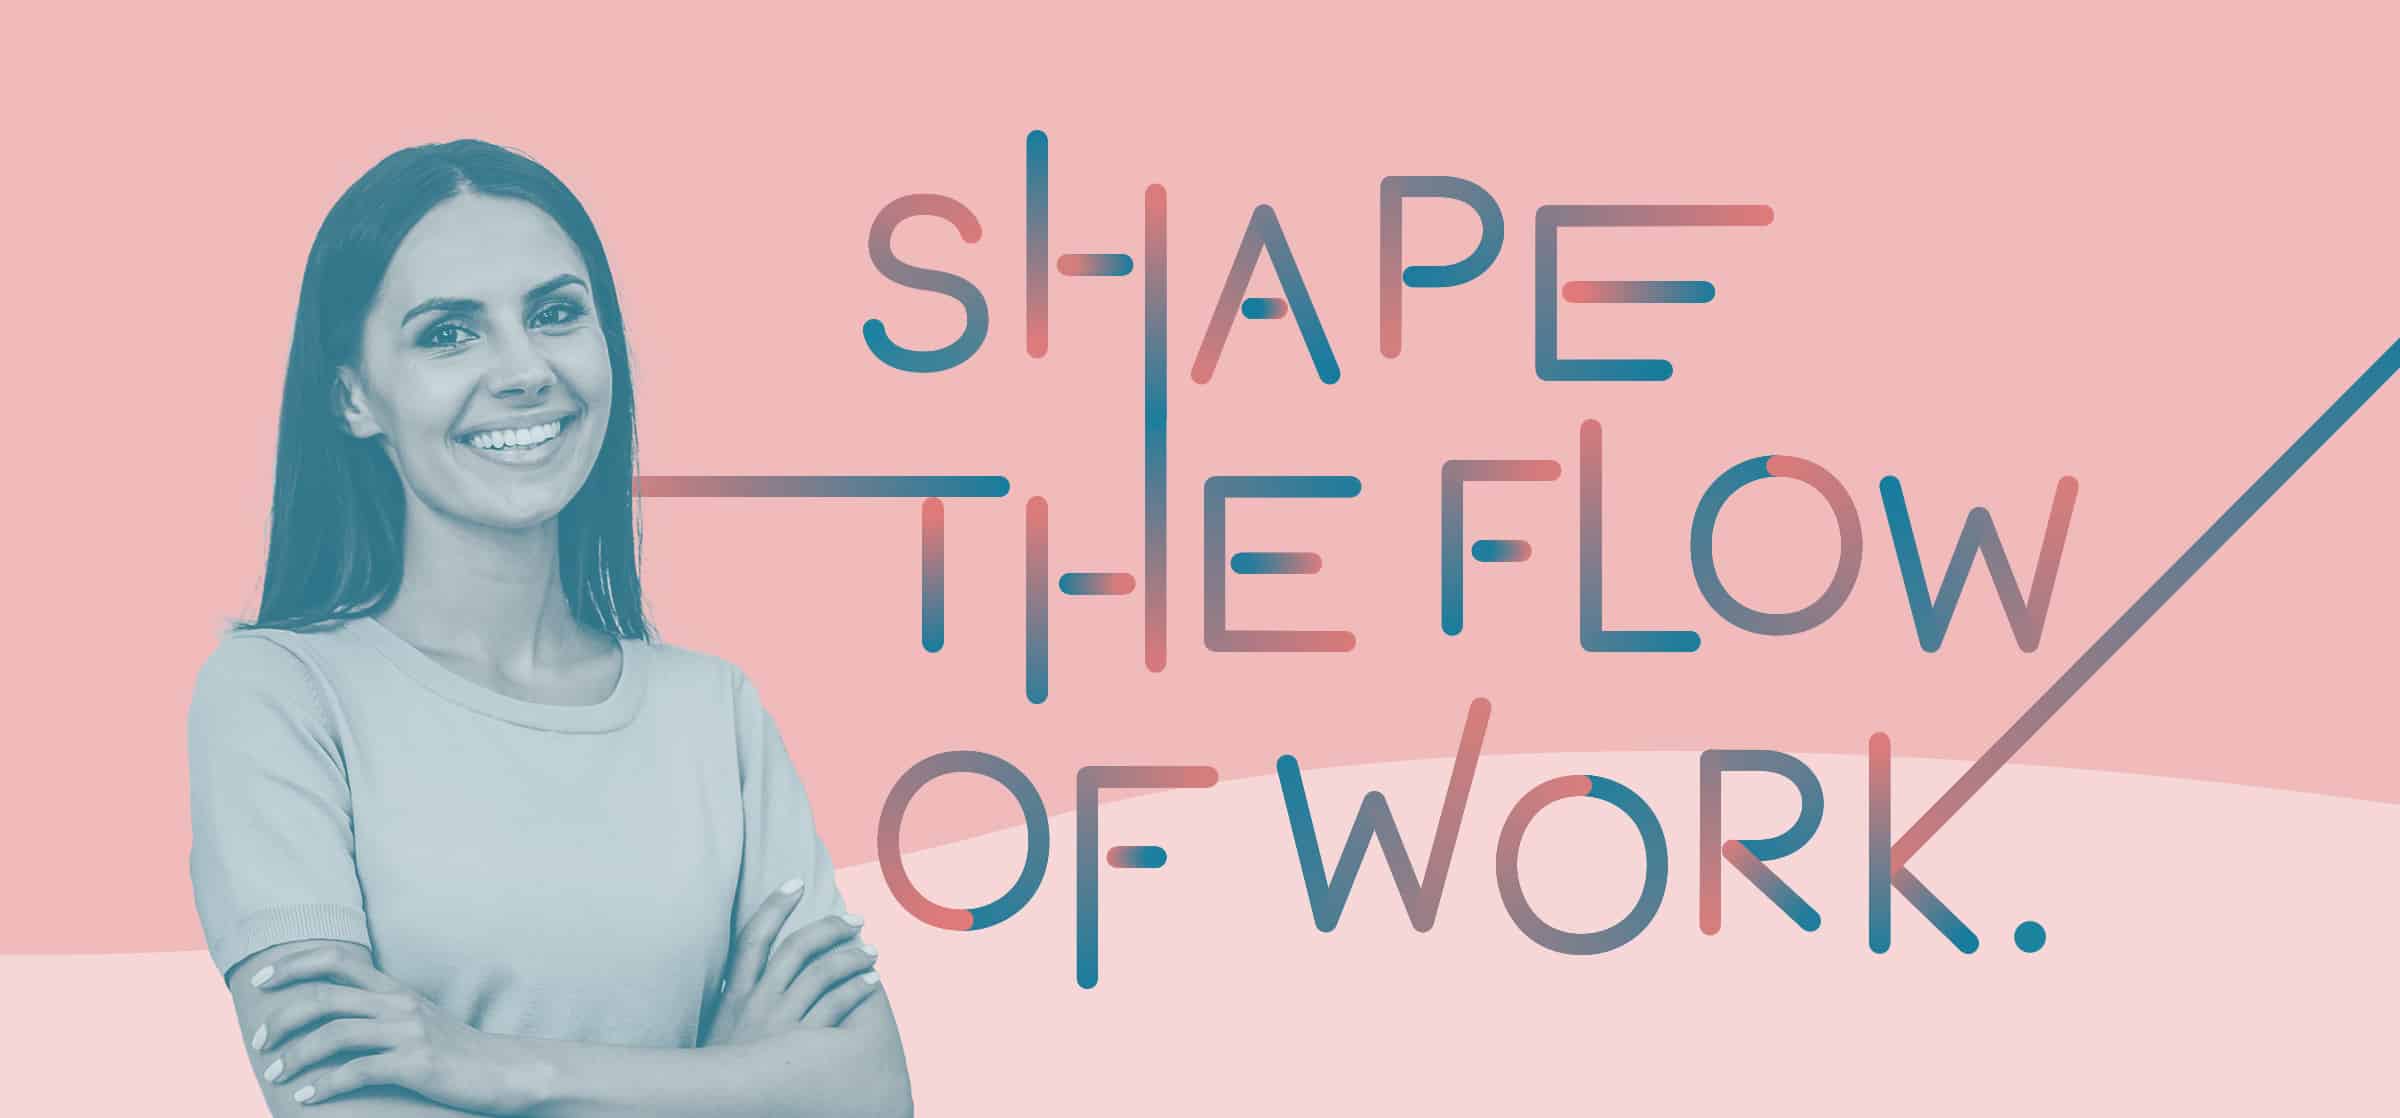 A smiling woman stands next to the words shape the flow of work